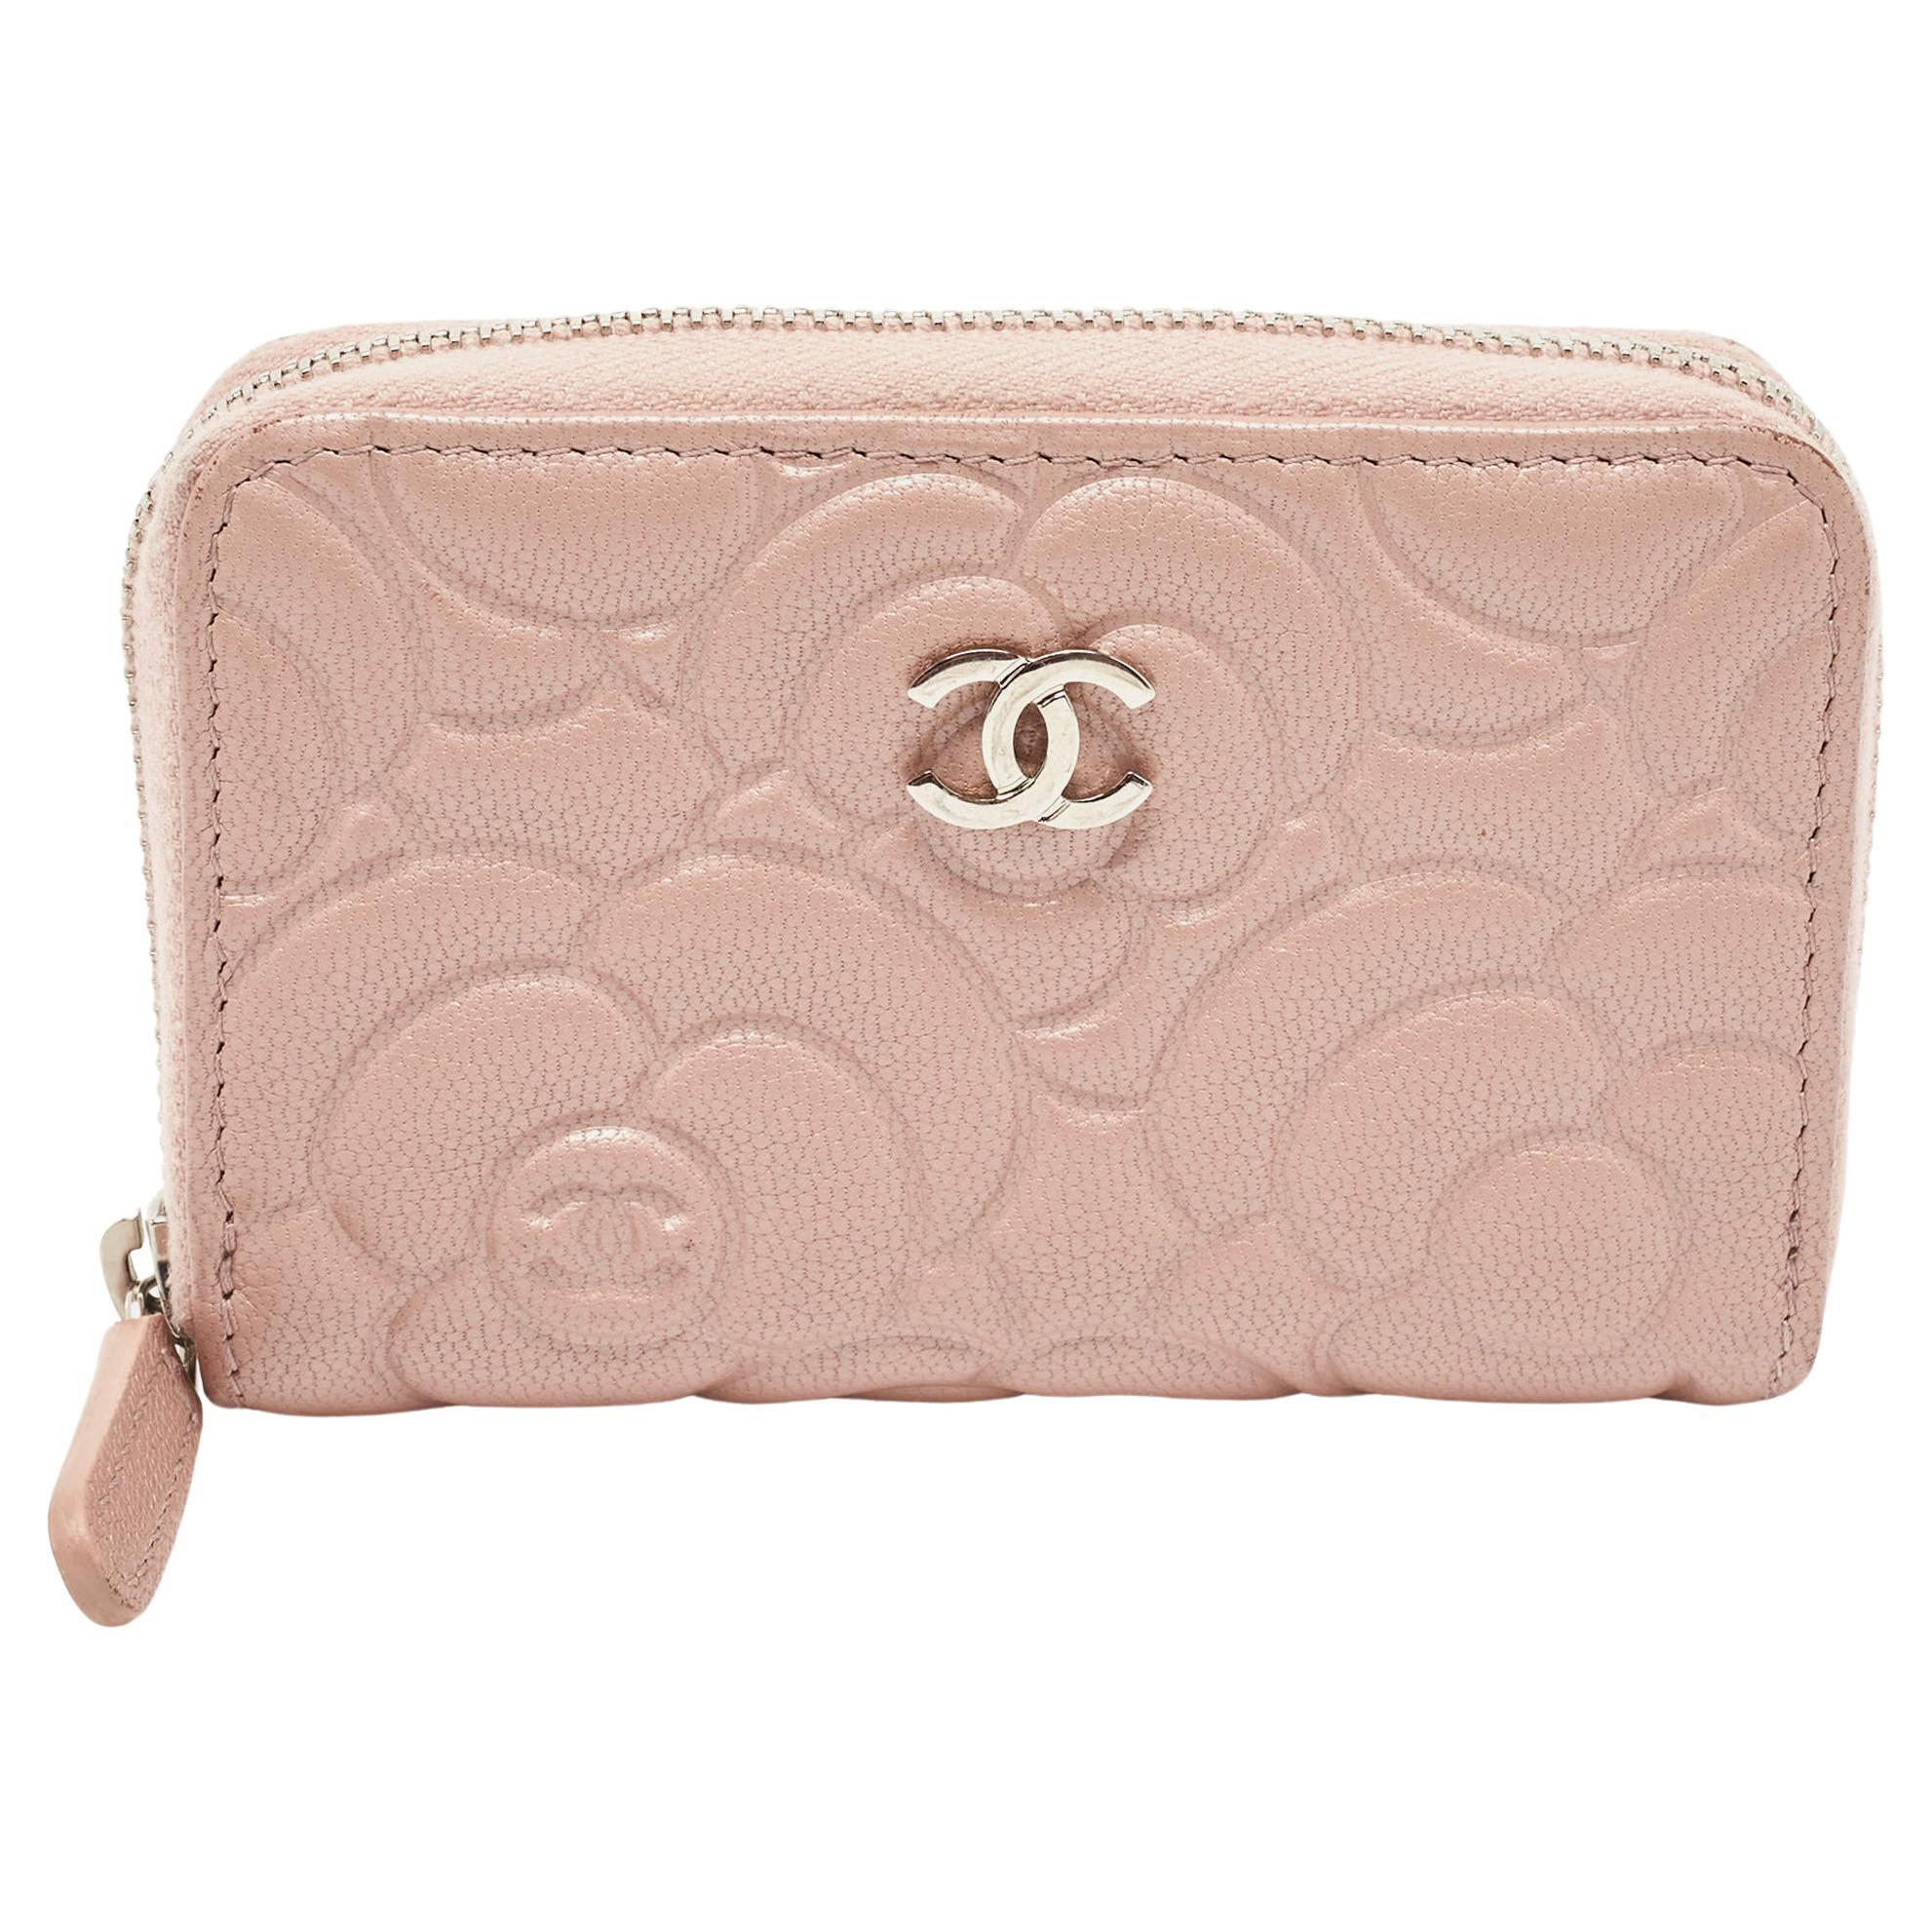 Chanel Pink Camellia Embossed Leather Zip Around Coin Purse For Sale